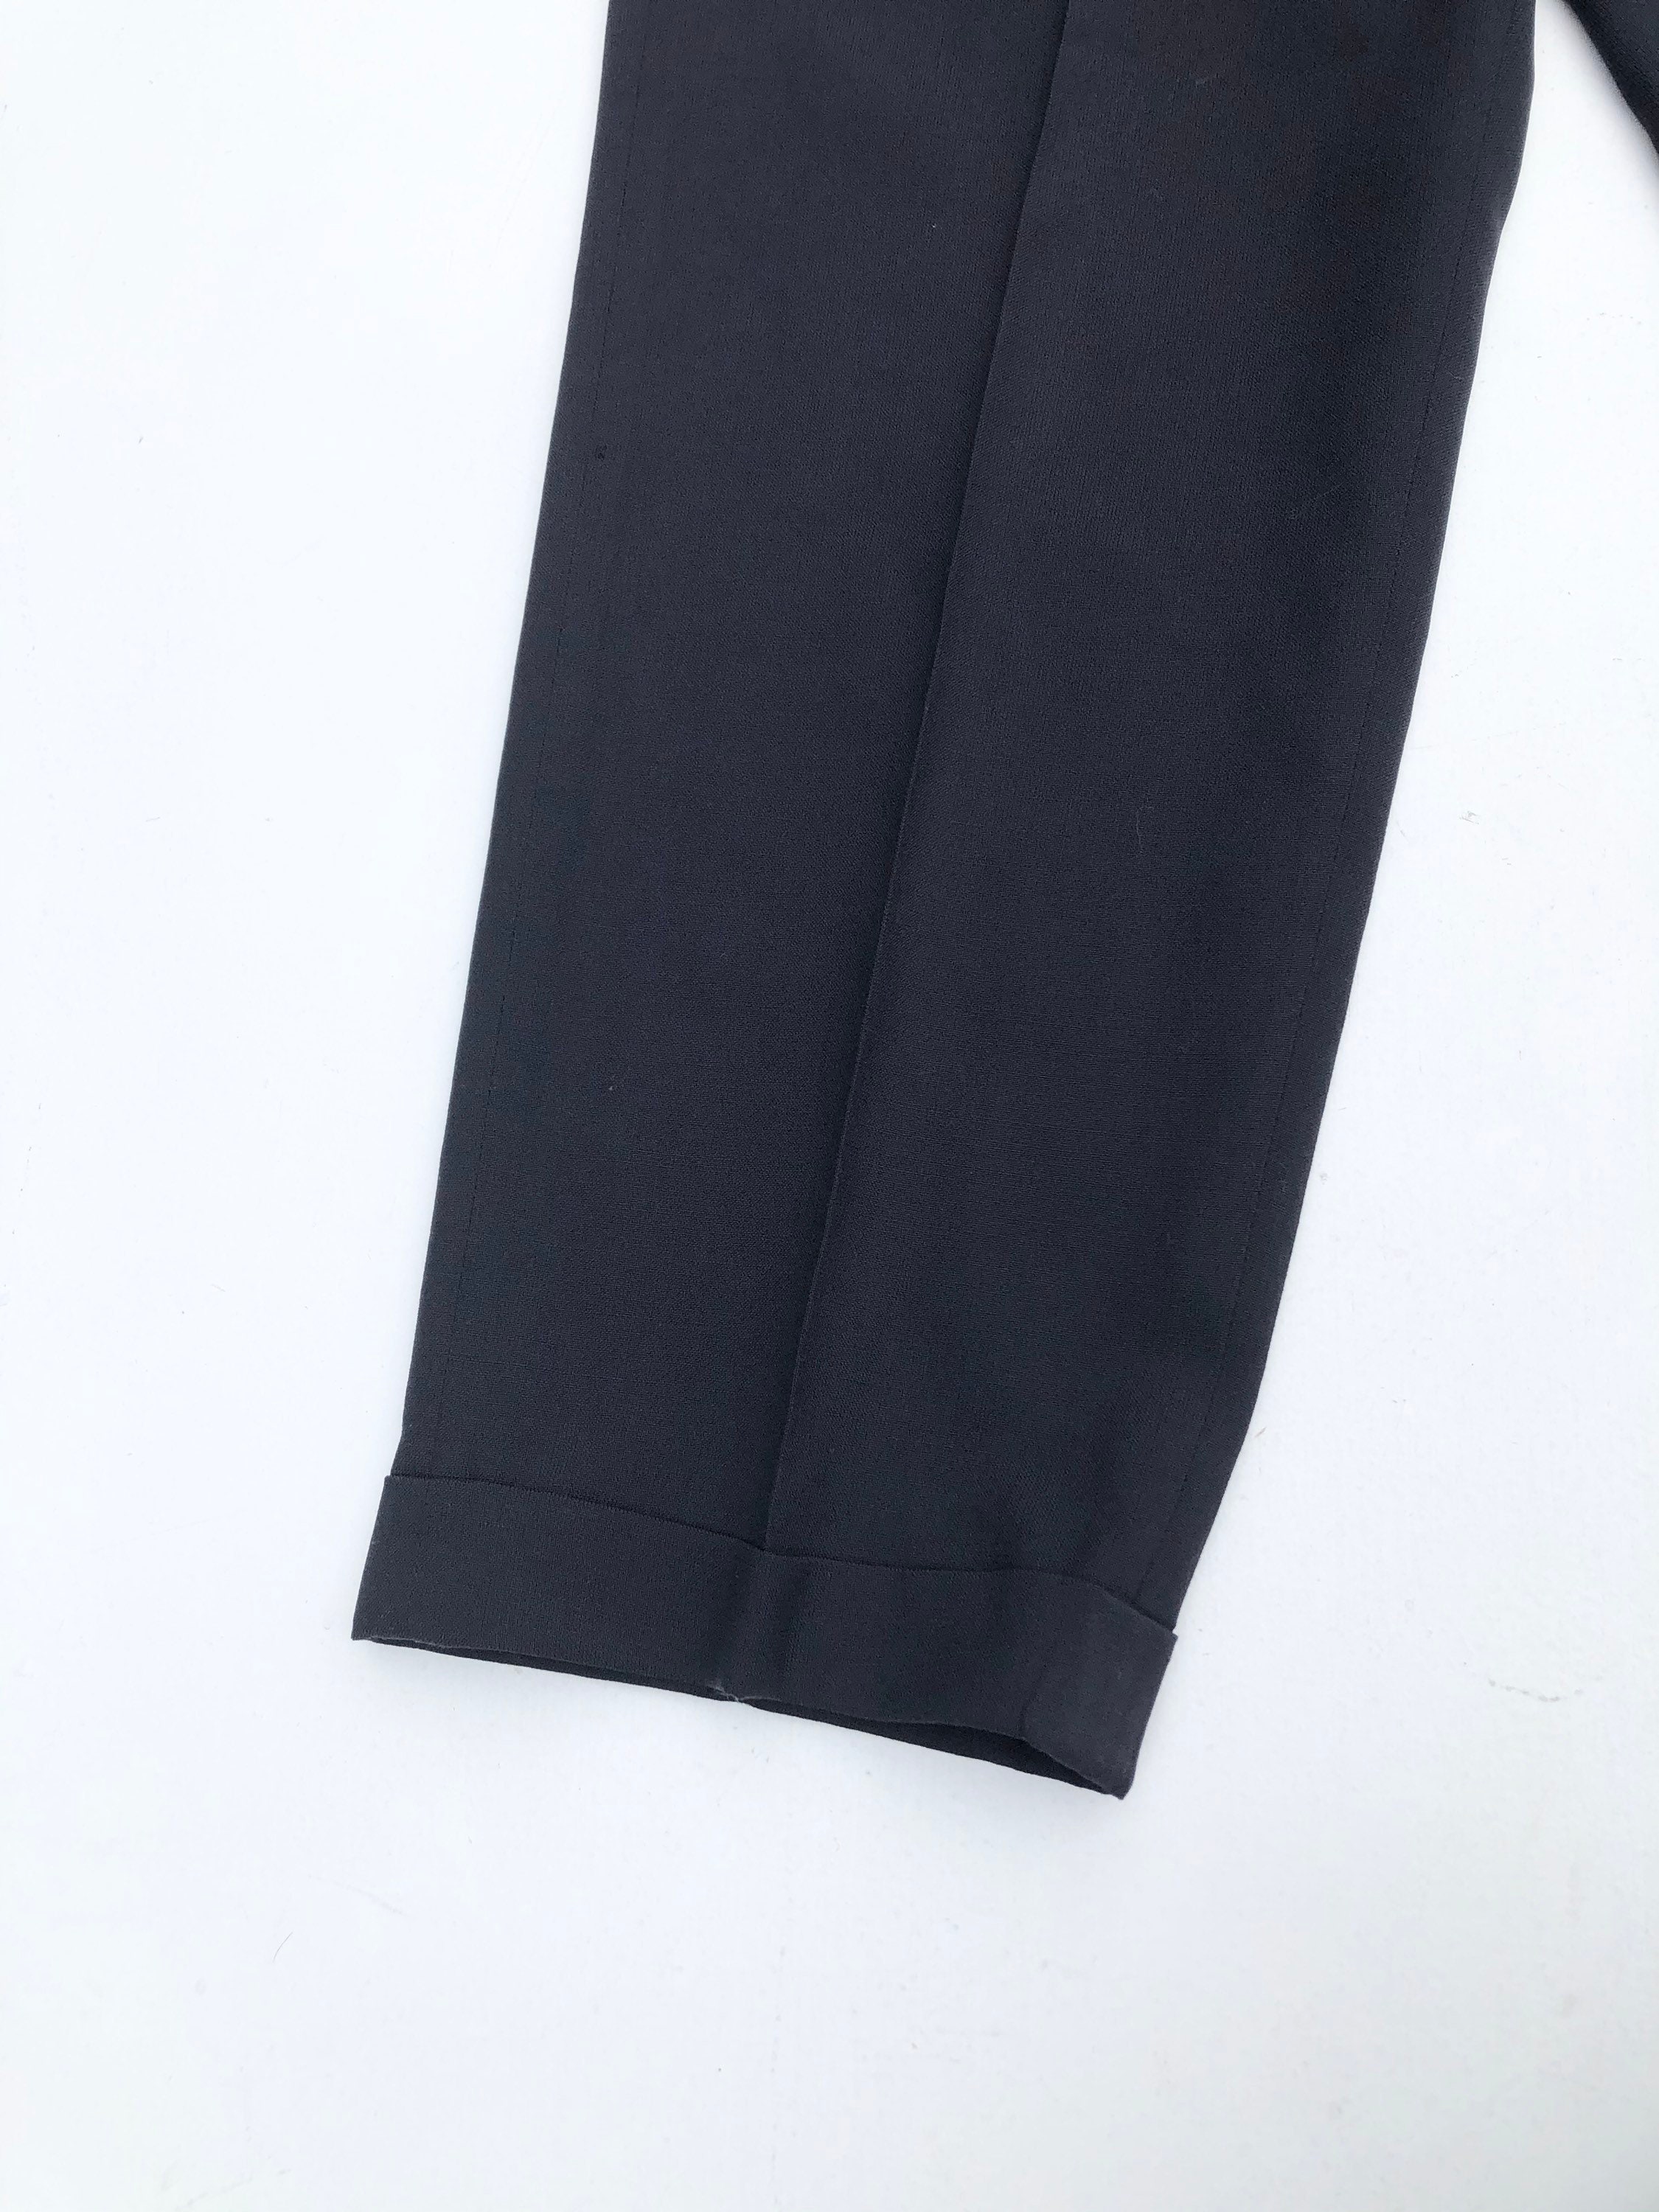 1950s Navy Rayon Crepe Trousers 30 | Etsy